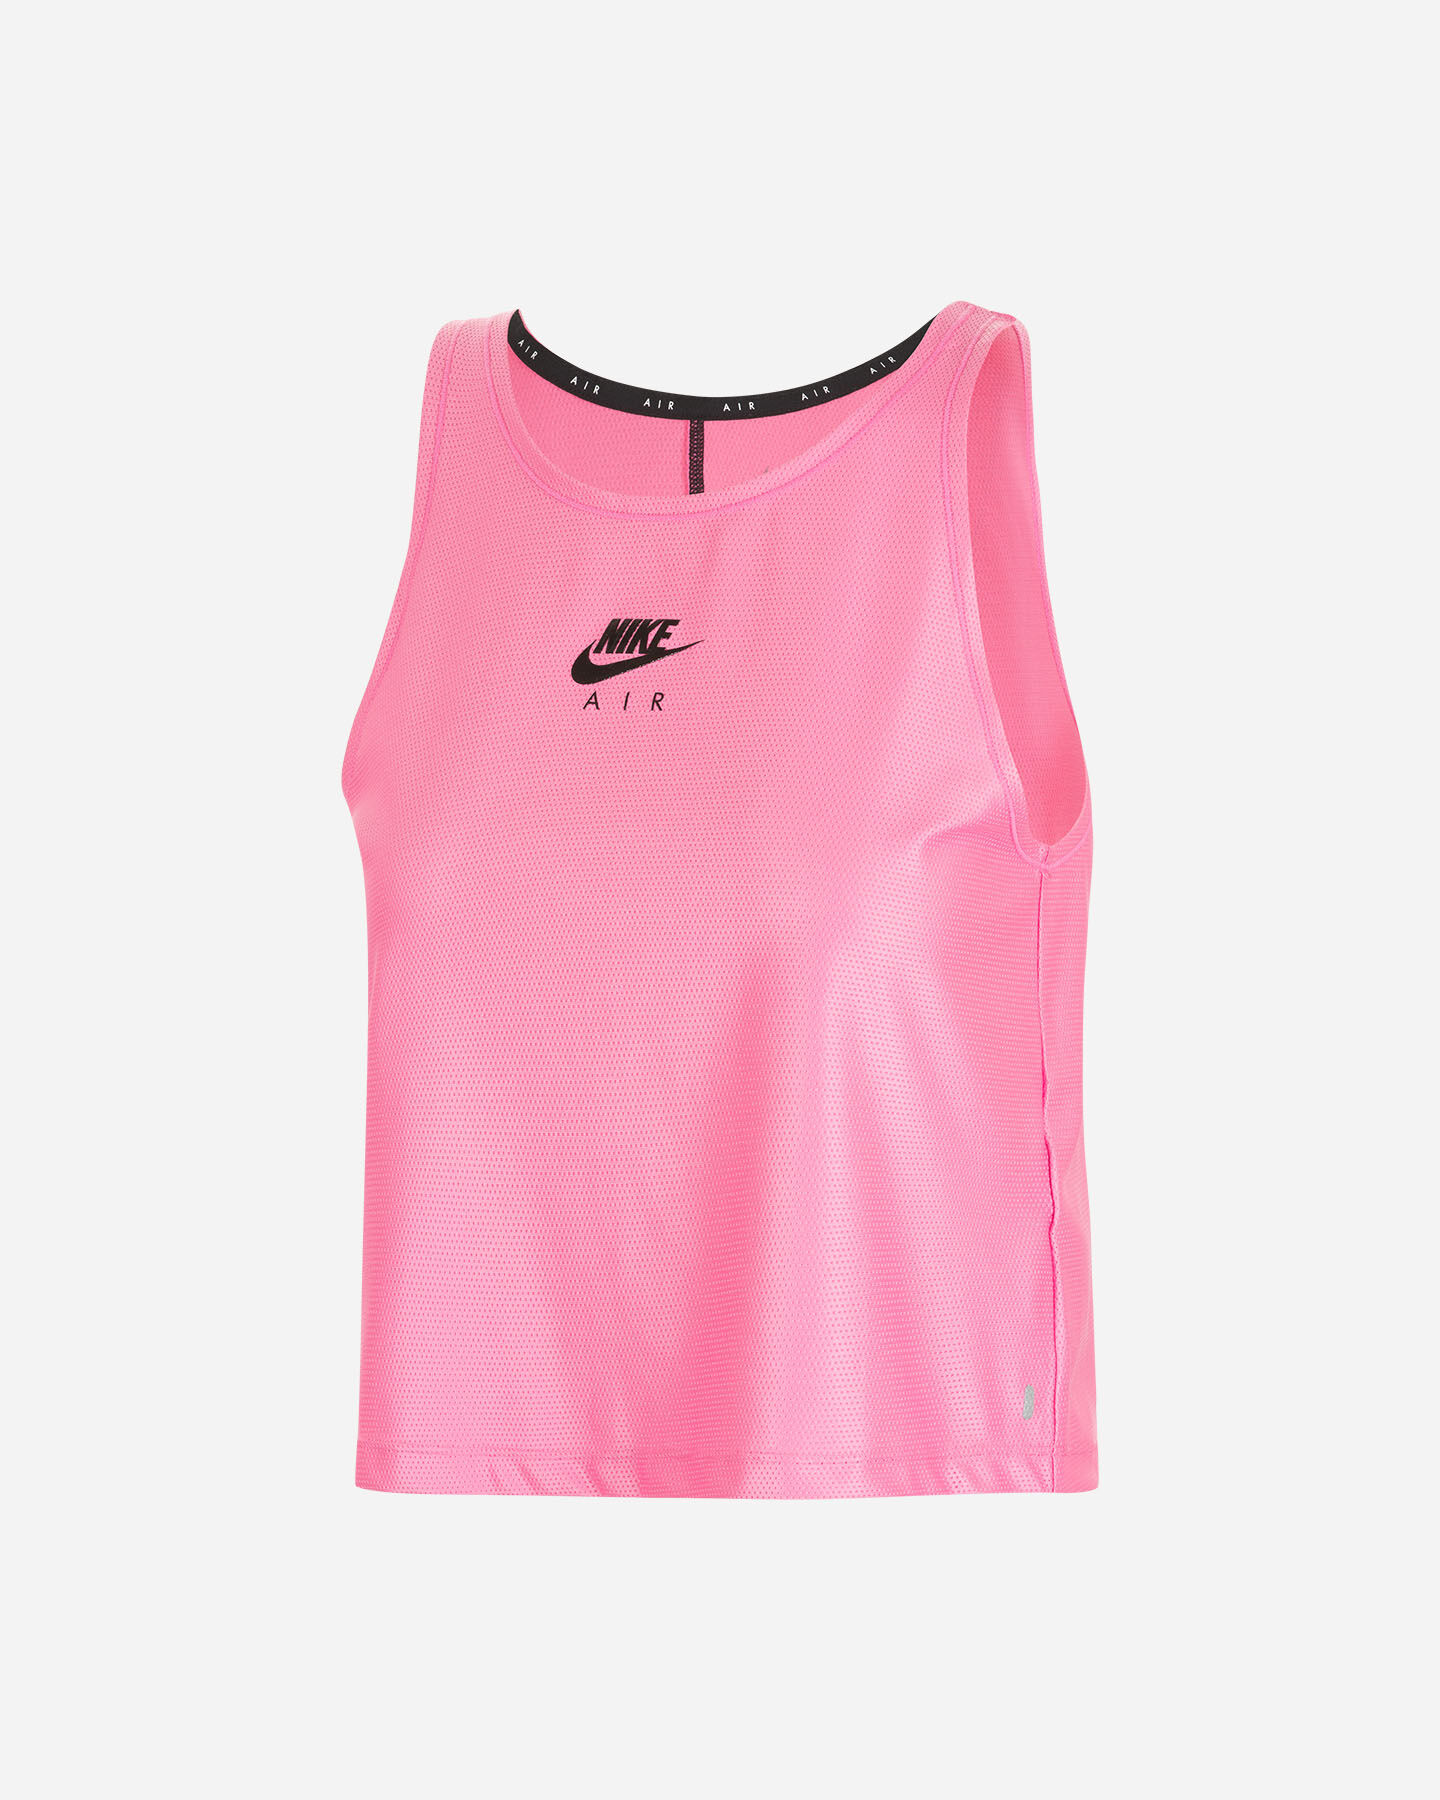  Canotta running NIKE AIR TANK ROSA W S5225296|607|XS scatto 0